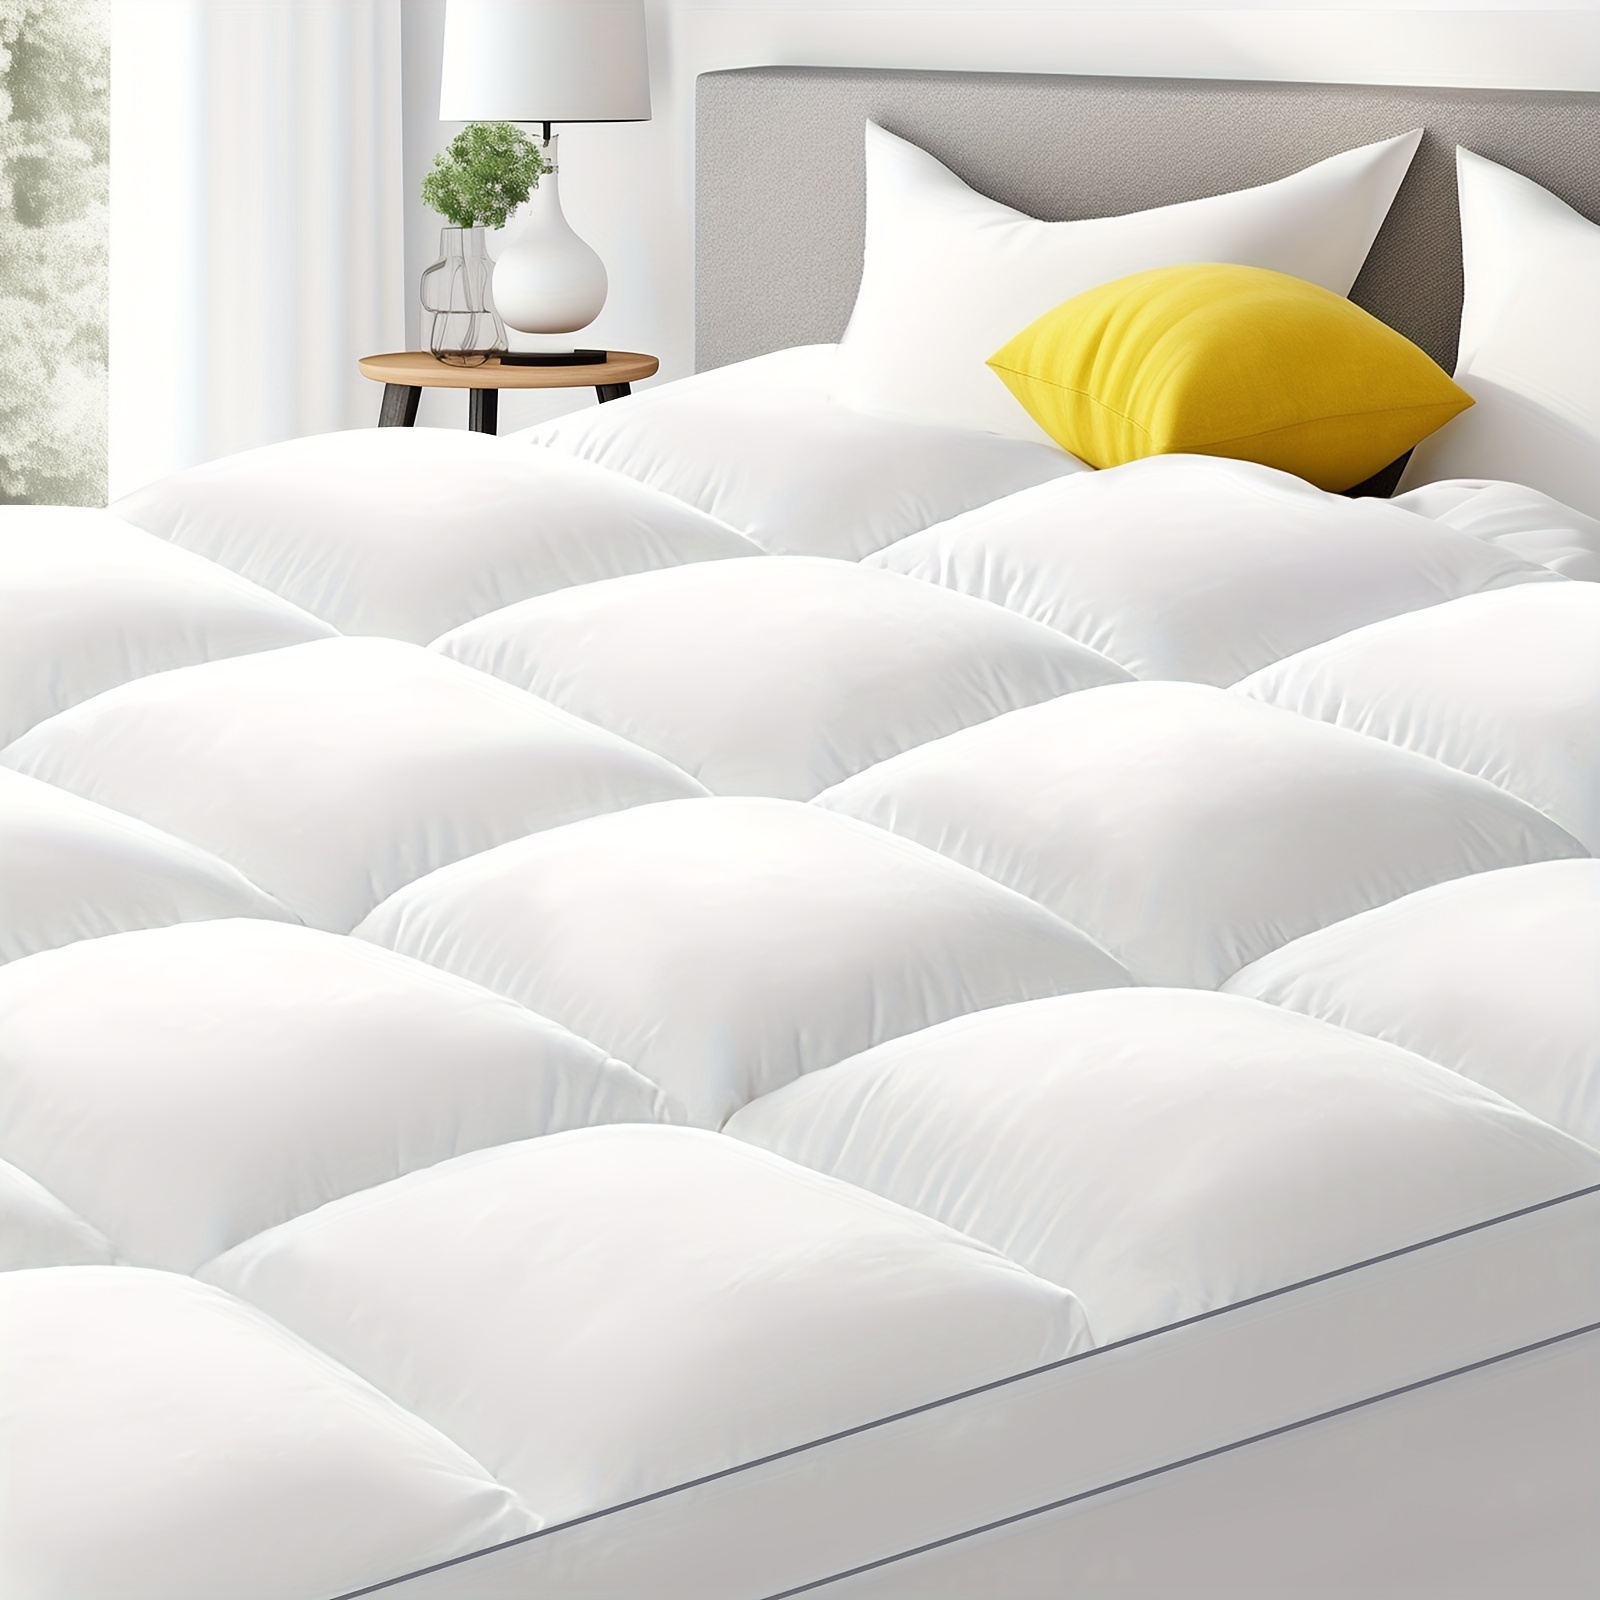 

900gsm White Extra Thick Mattress Topper With Flat Sheet And Pillowcases - Extra Thick Mattress Pad Cover For - Soft Bedding Sheet - Overfilled Plush Pillow Top With 8-21 Inch Deep Pocket